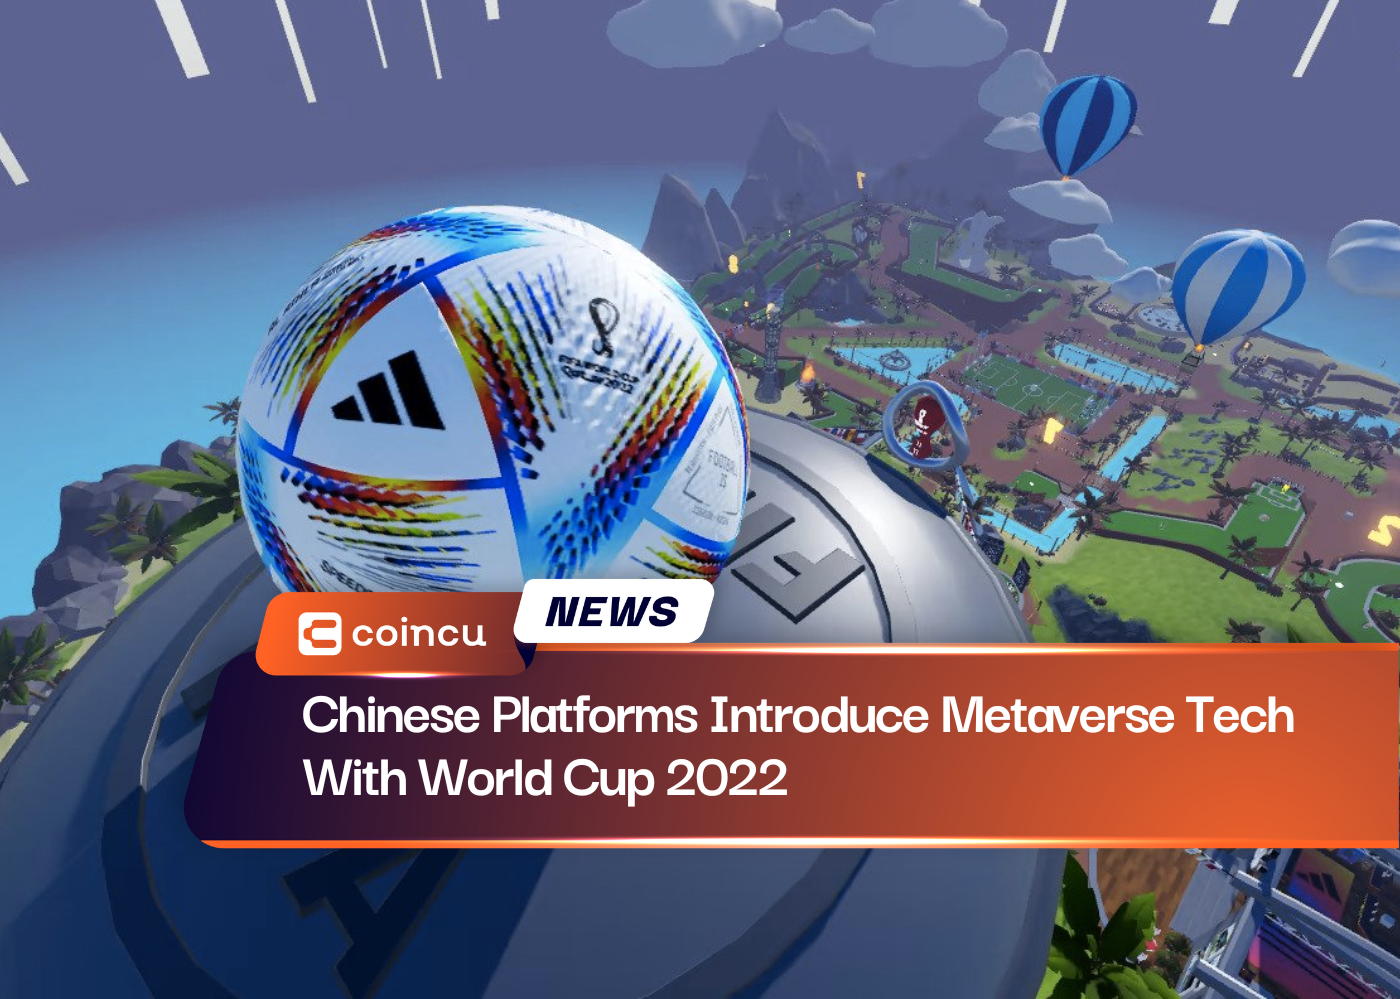 Chinese Platforms Introduce Metaverse Tech With World Cup 2022